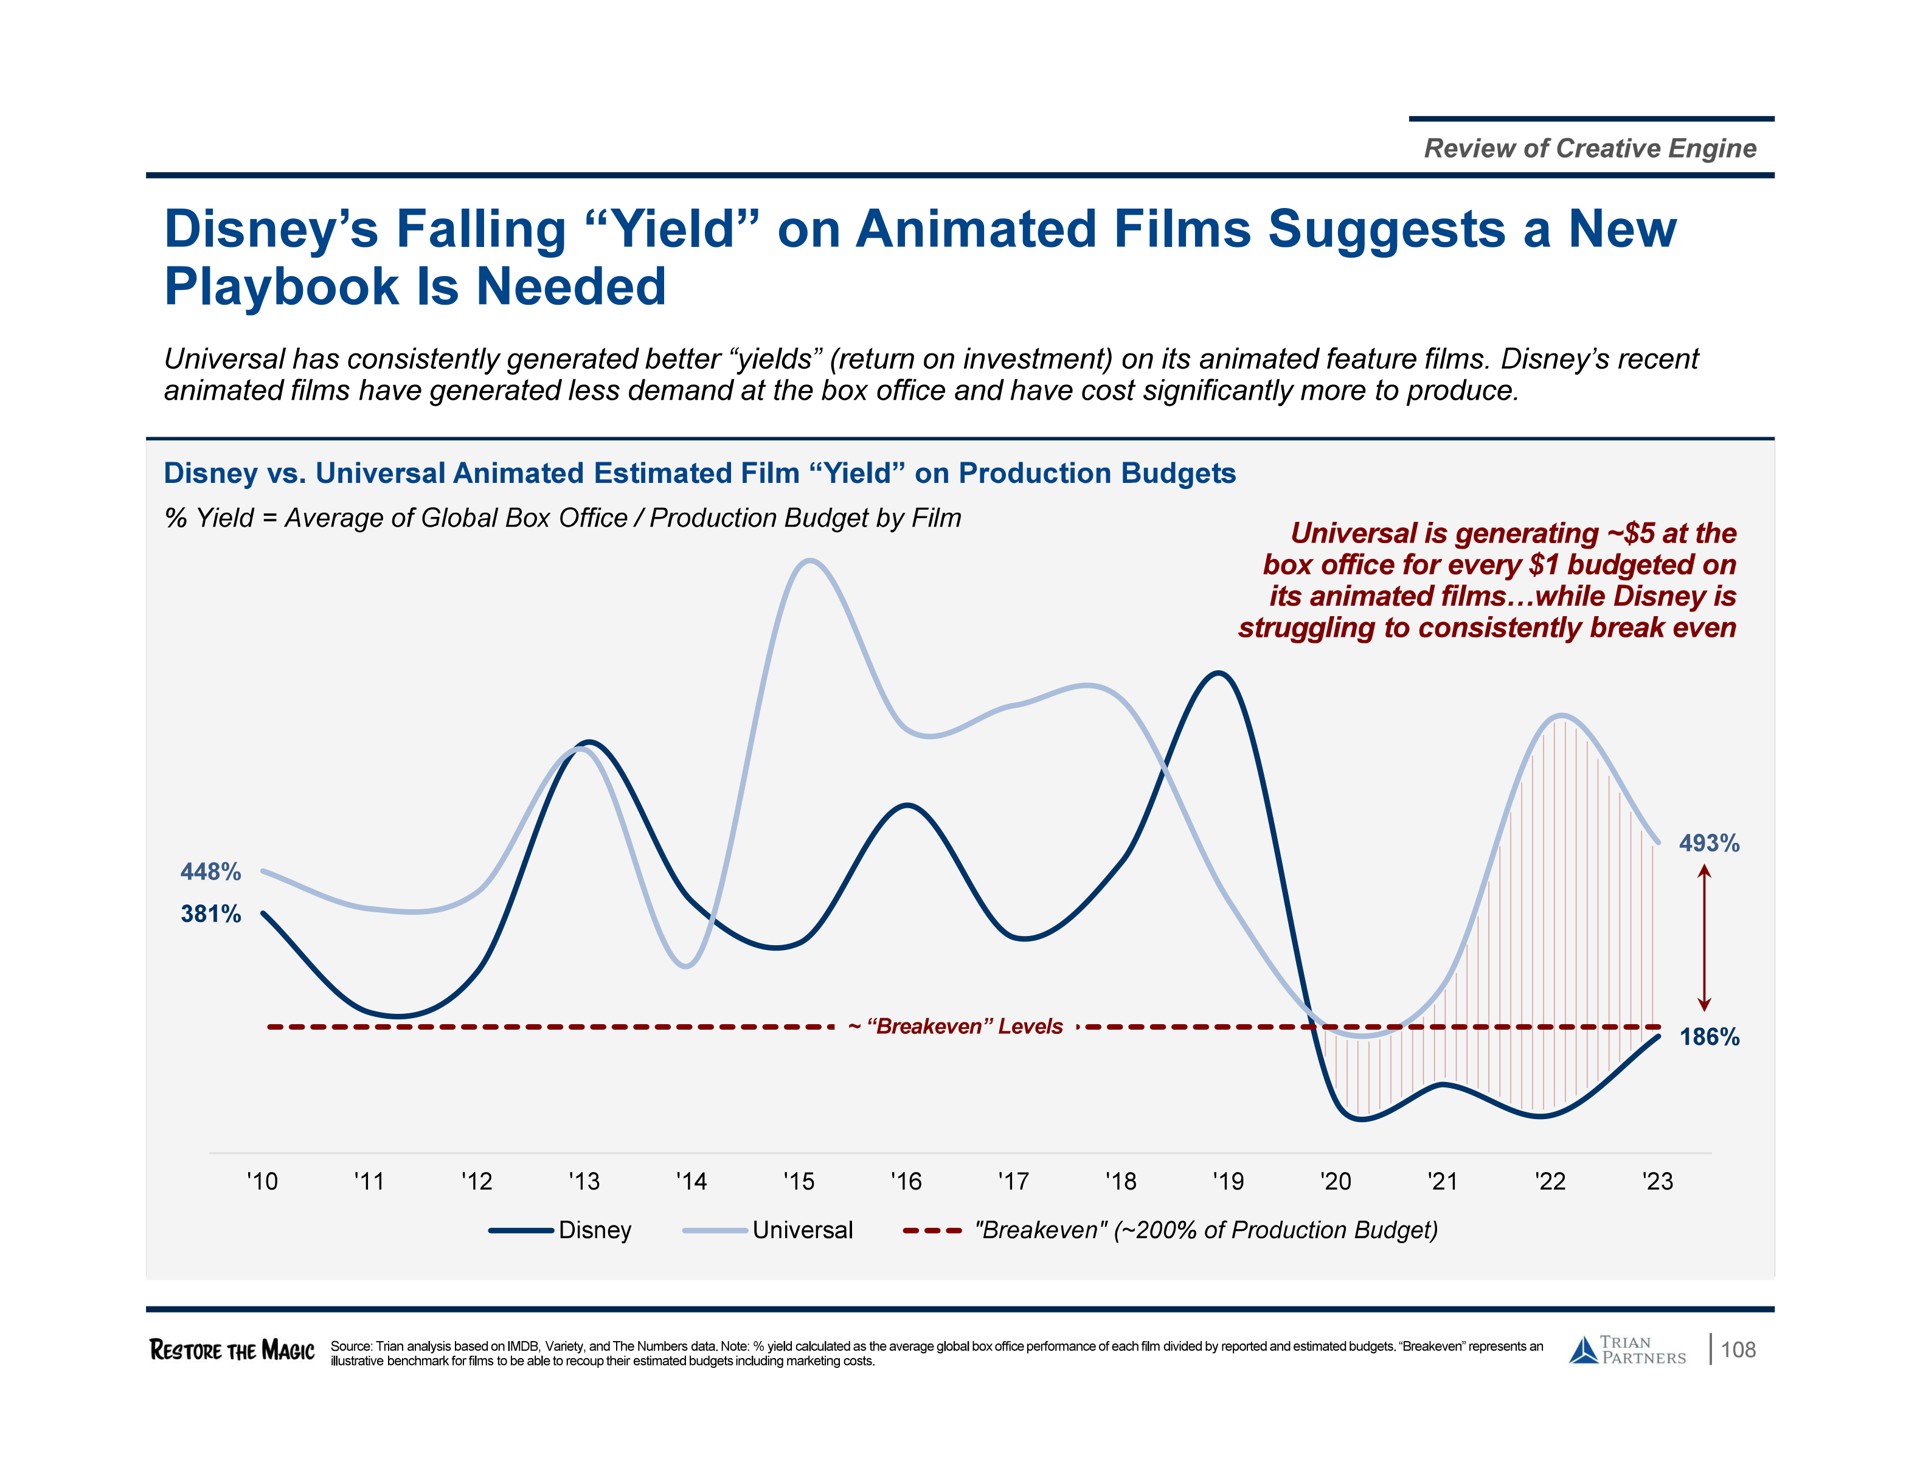 falling yield on animated films suggests a new playbook is needed | Trian Partners